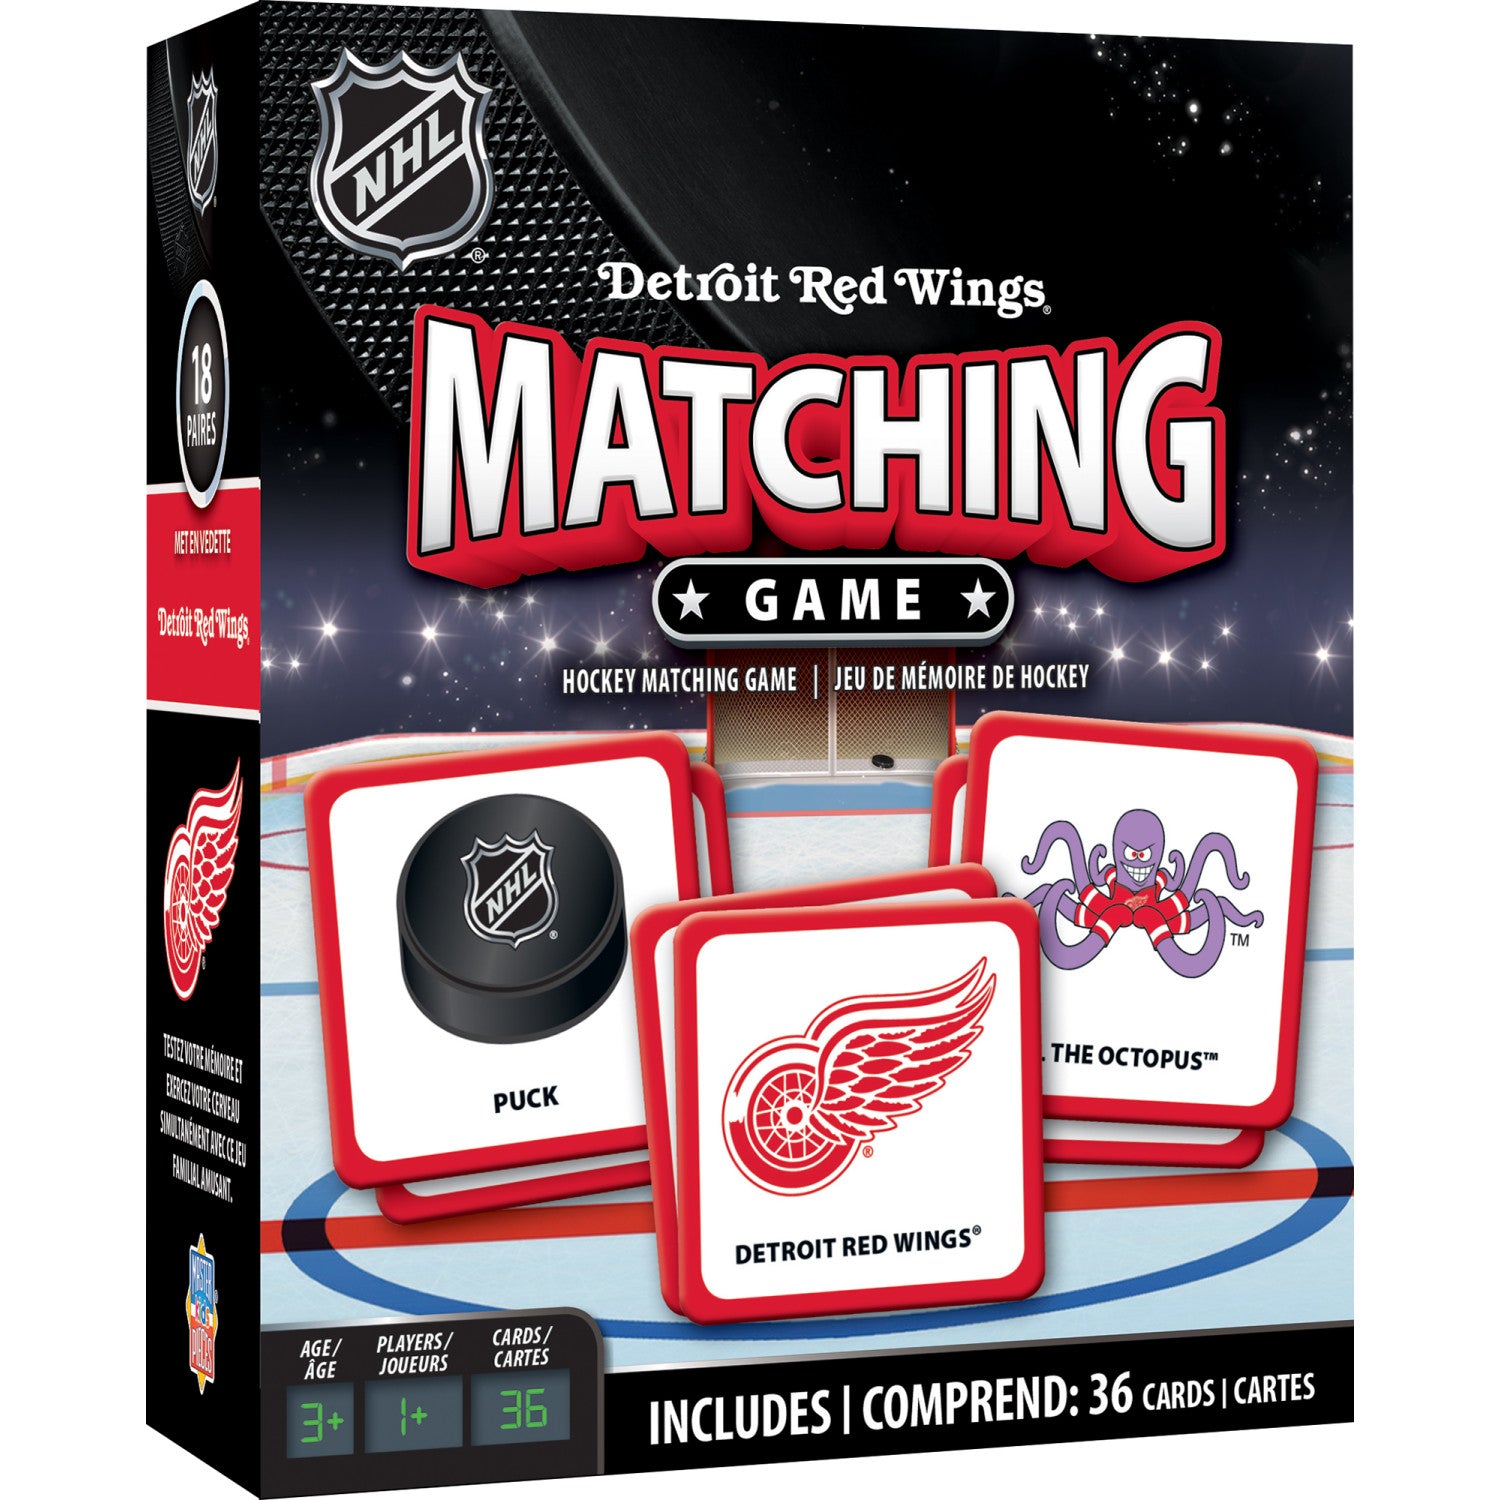 Detroit Red Wings Matching Game